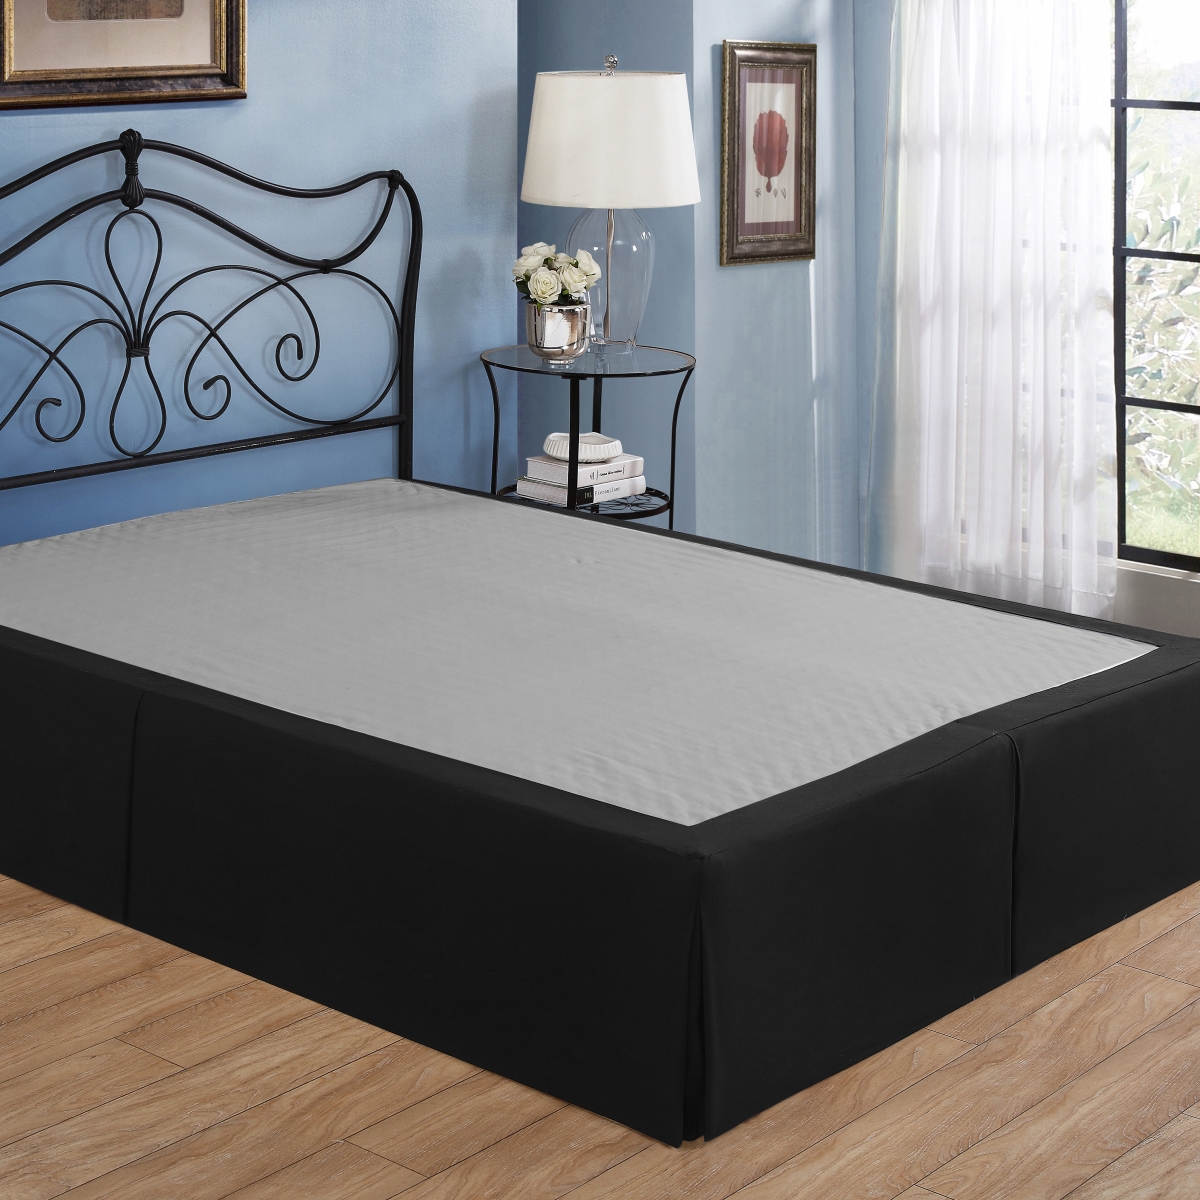 Fre24514blac05 14 In. Tailored Microfiber Black - Cal King